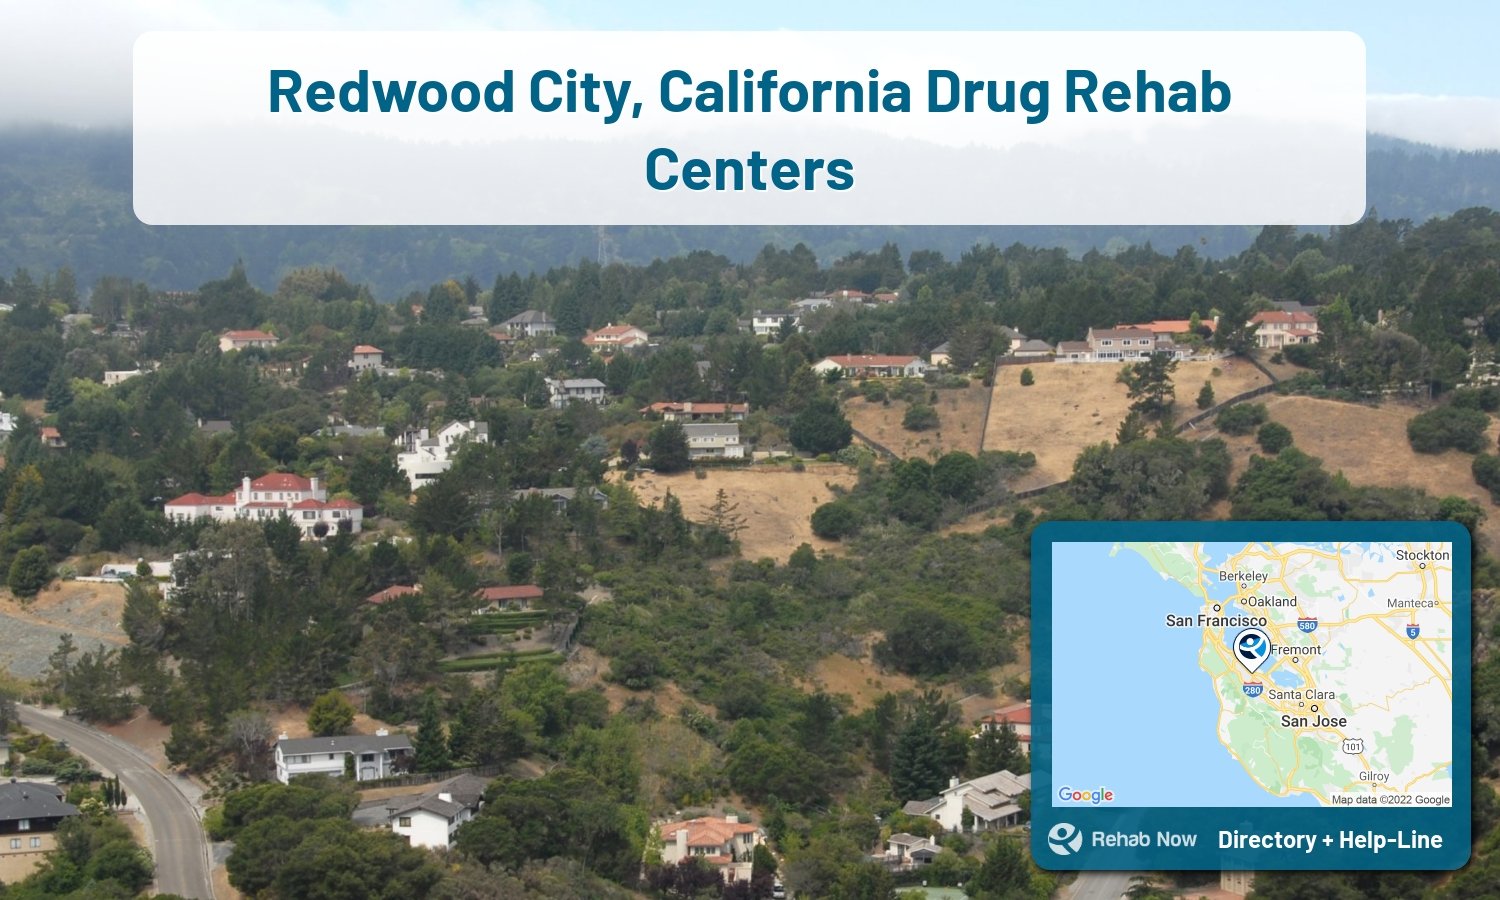 Let our expert counselors help find the best addiction treatment in Redwood City, California now with a free call to our hotline.